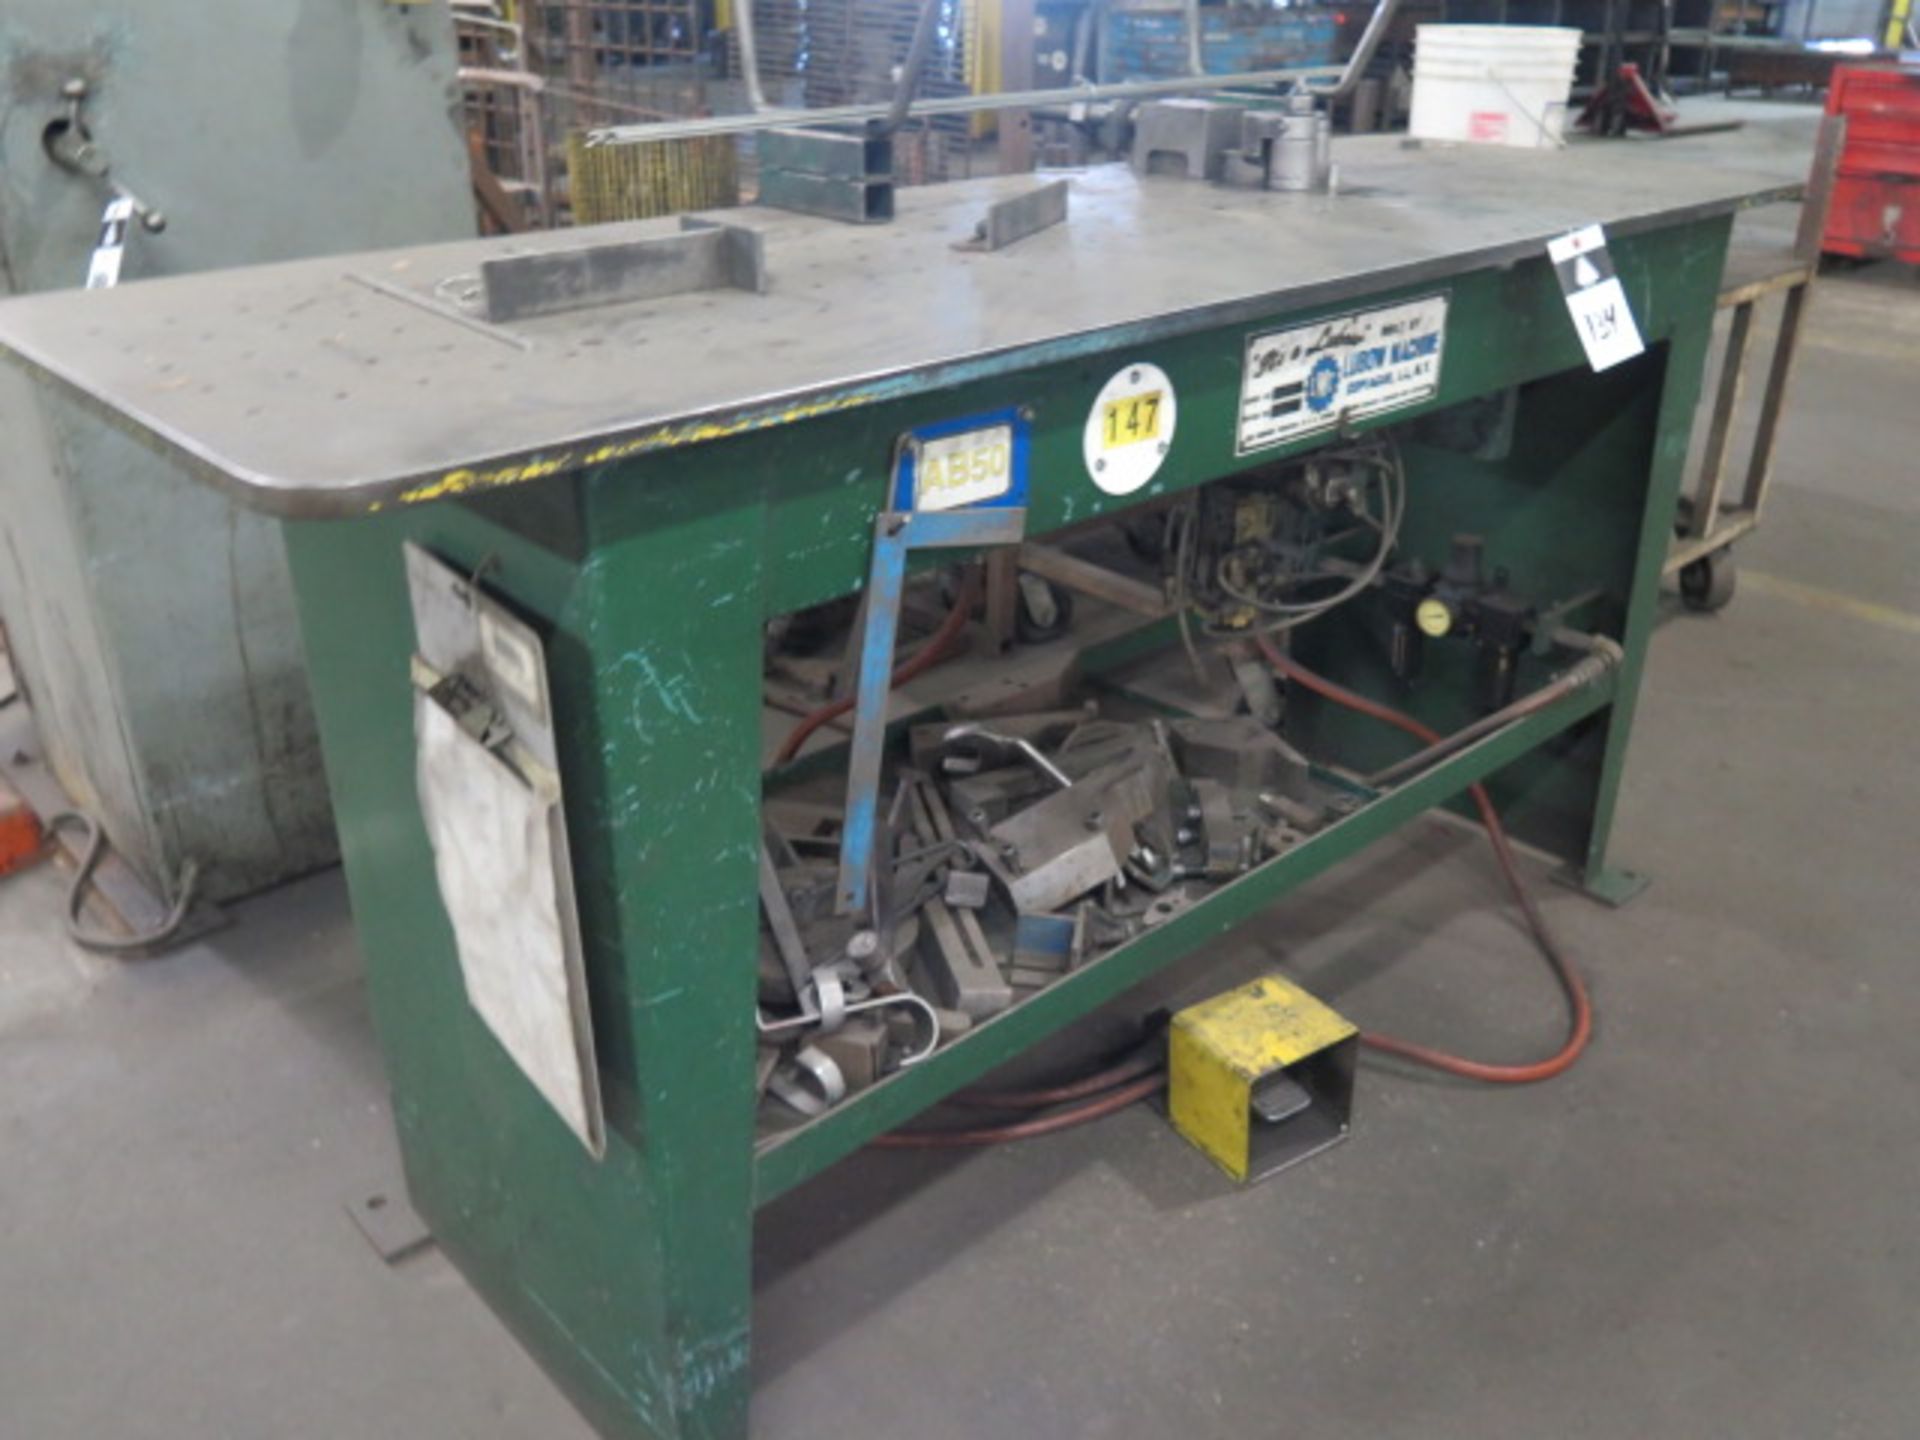 Lubow ML-10T Pneumatic Rotary Table Bender s/n 0776 w/ 24” x 72” Table (SOLD AS-IS - N0 WARRANTY) - Image 2 of 7